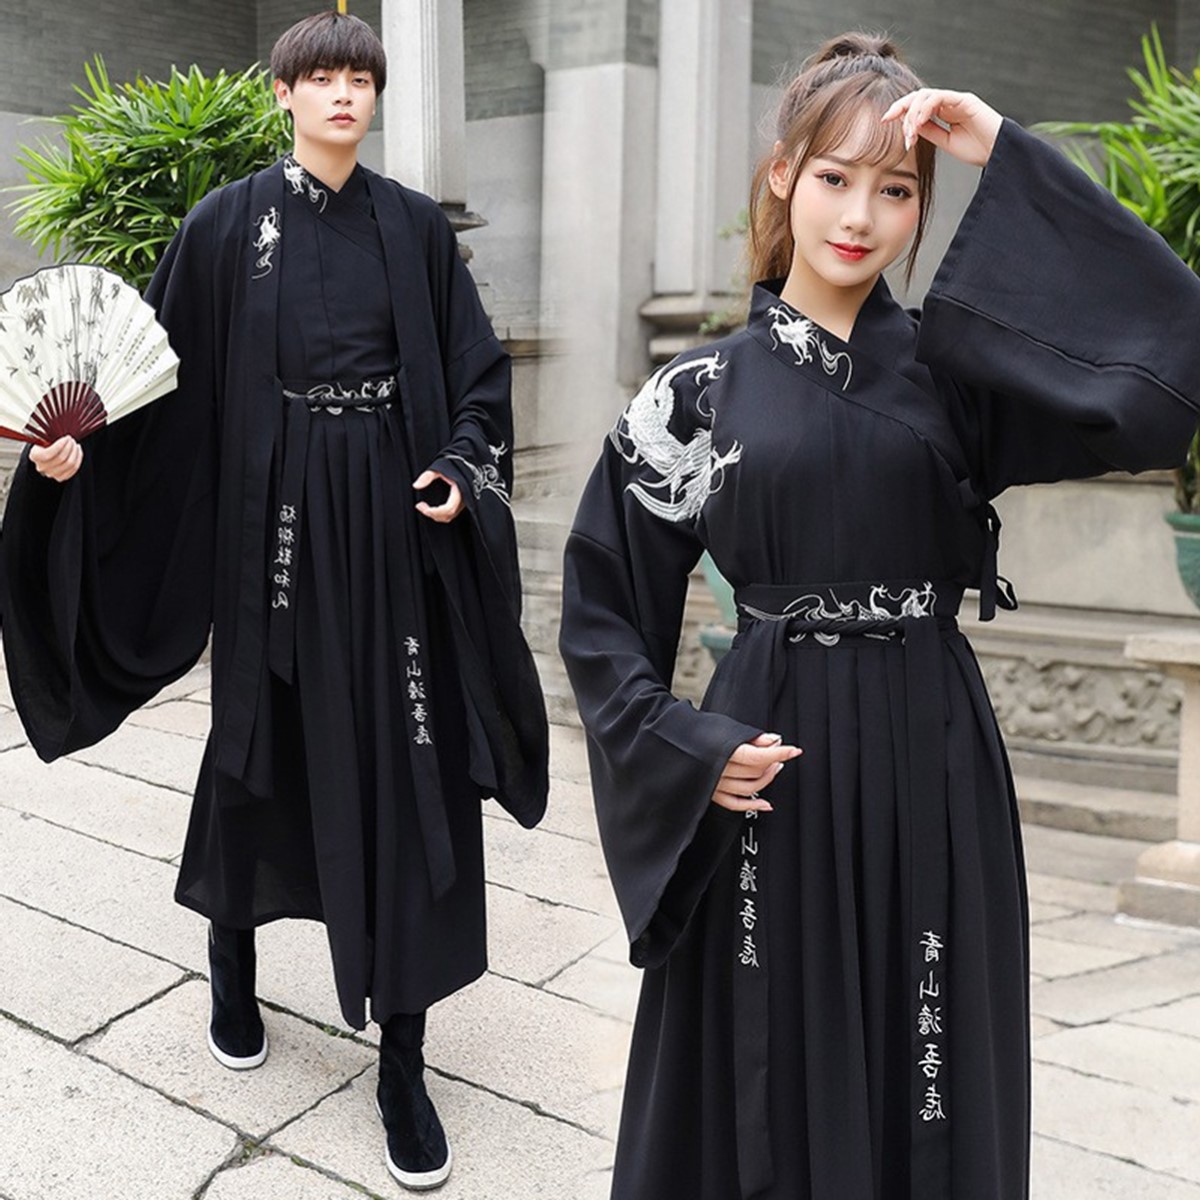 2021 Best Chinese Traditional Clothing | Black Hanfu Dress For Women ...